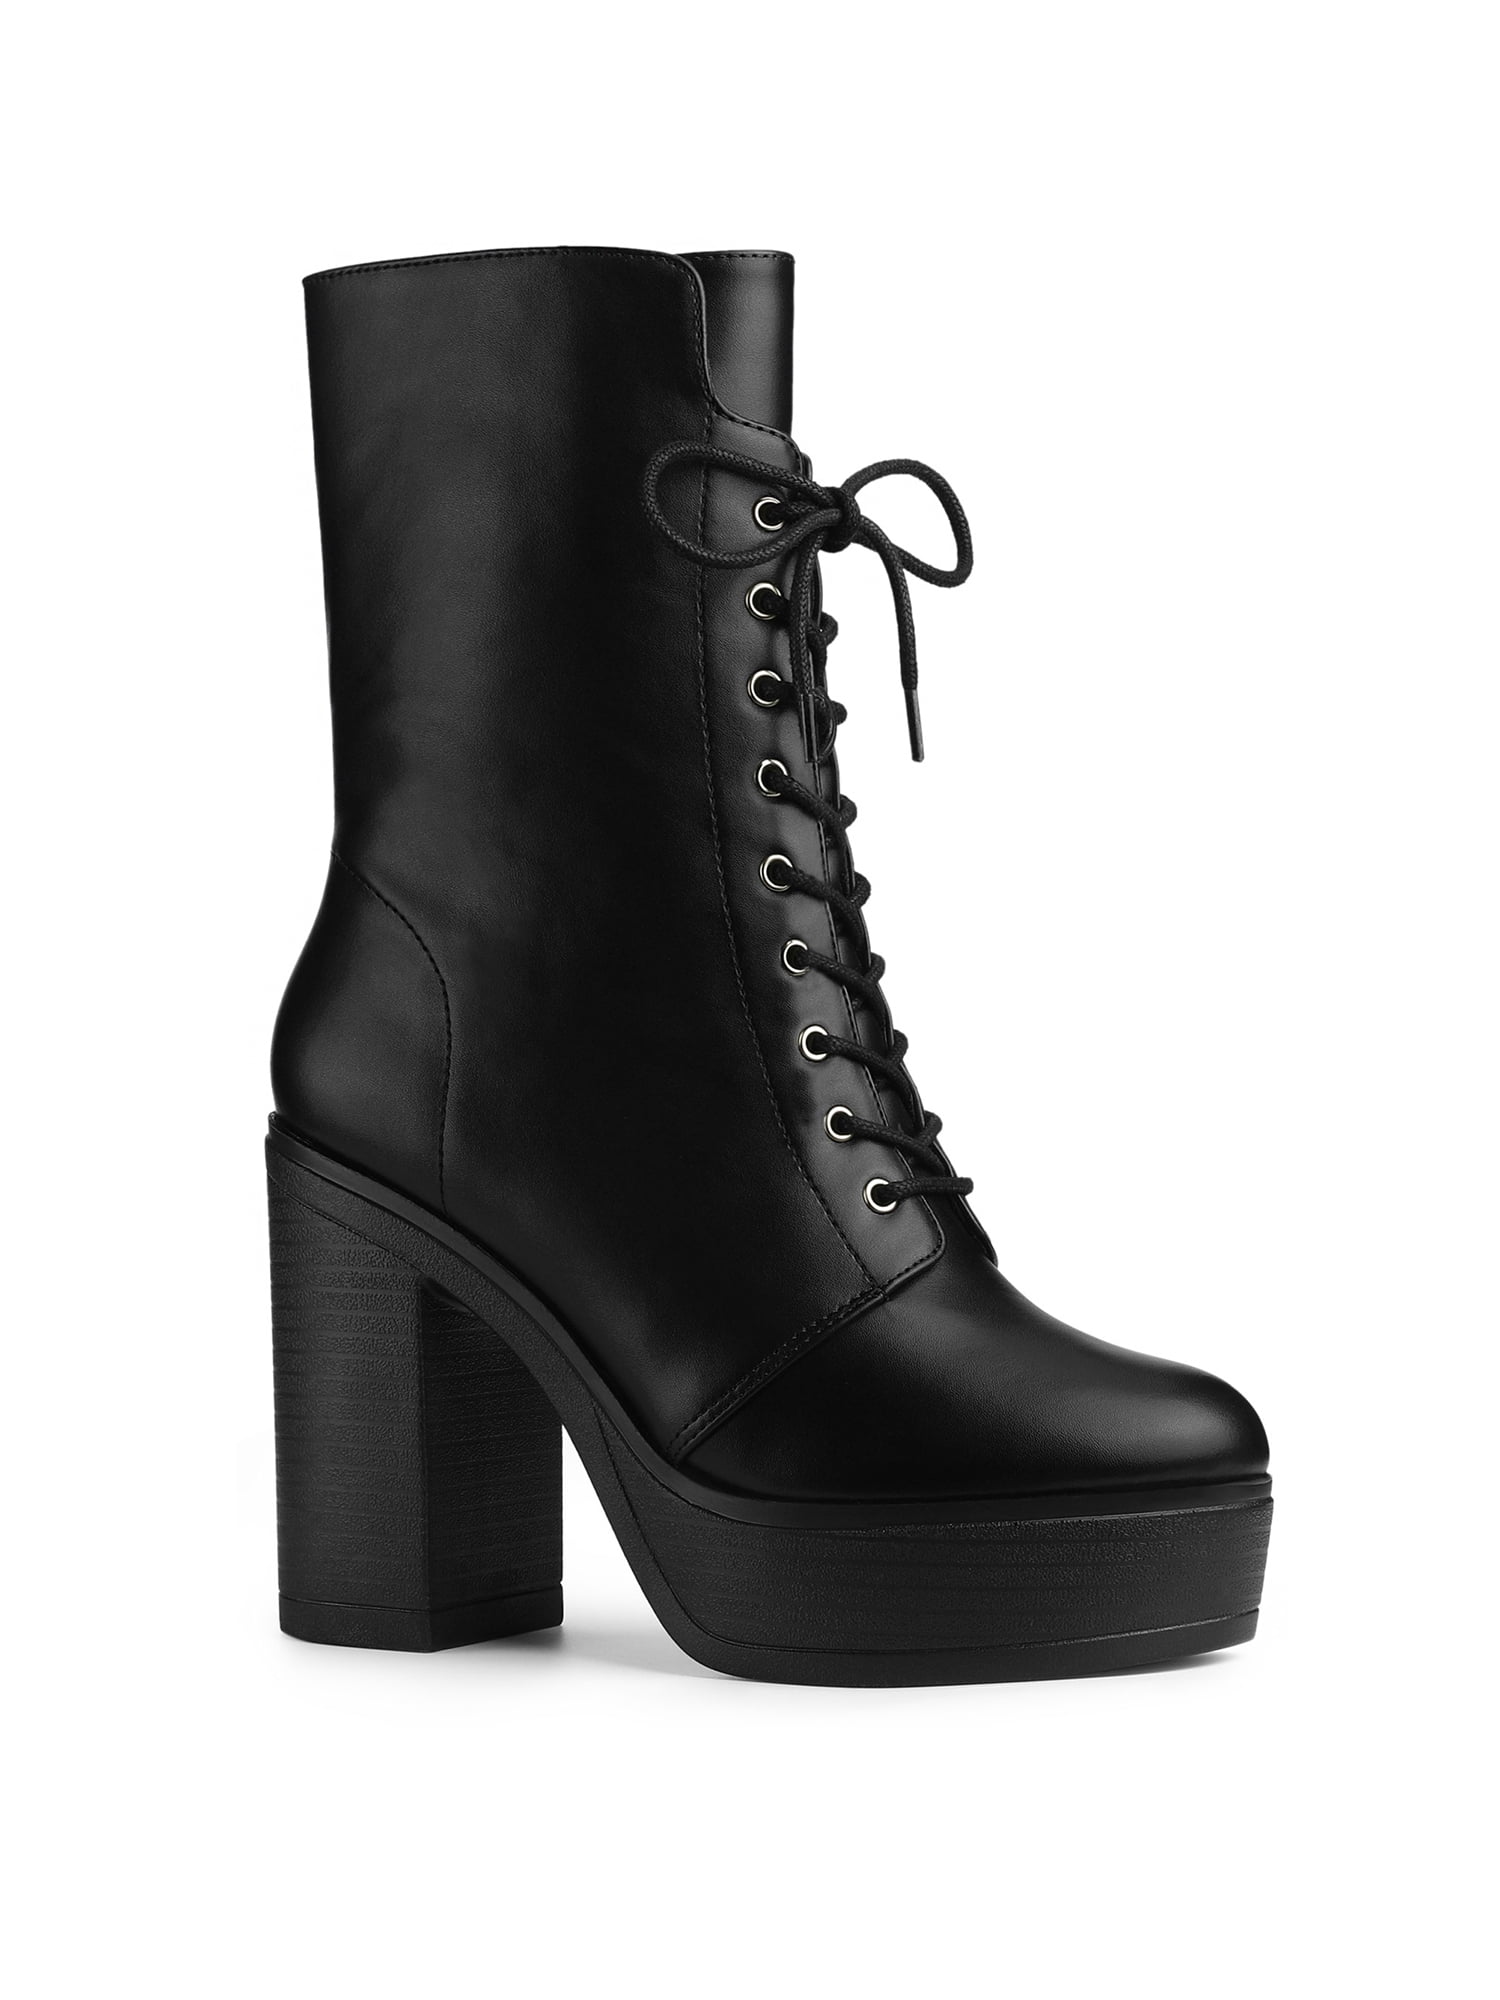 Shop Givenchy Leather Block-Heel Combat Boots | Saks Fifth Avenue